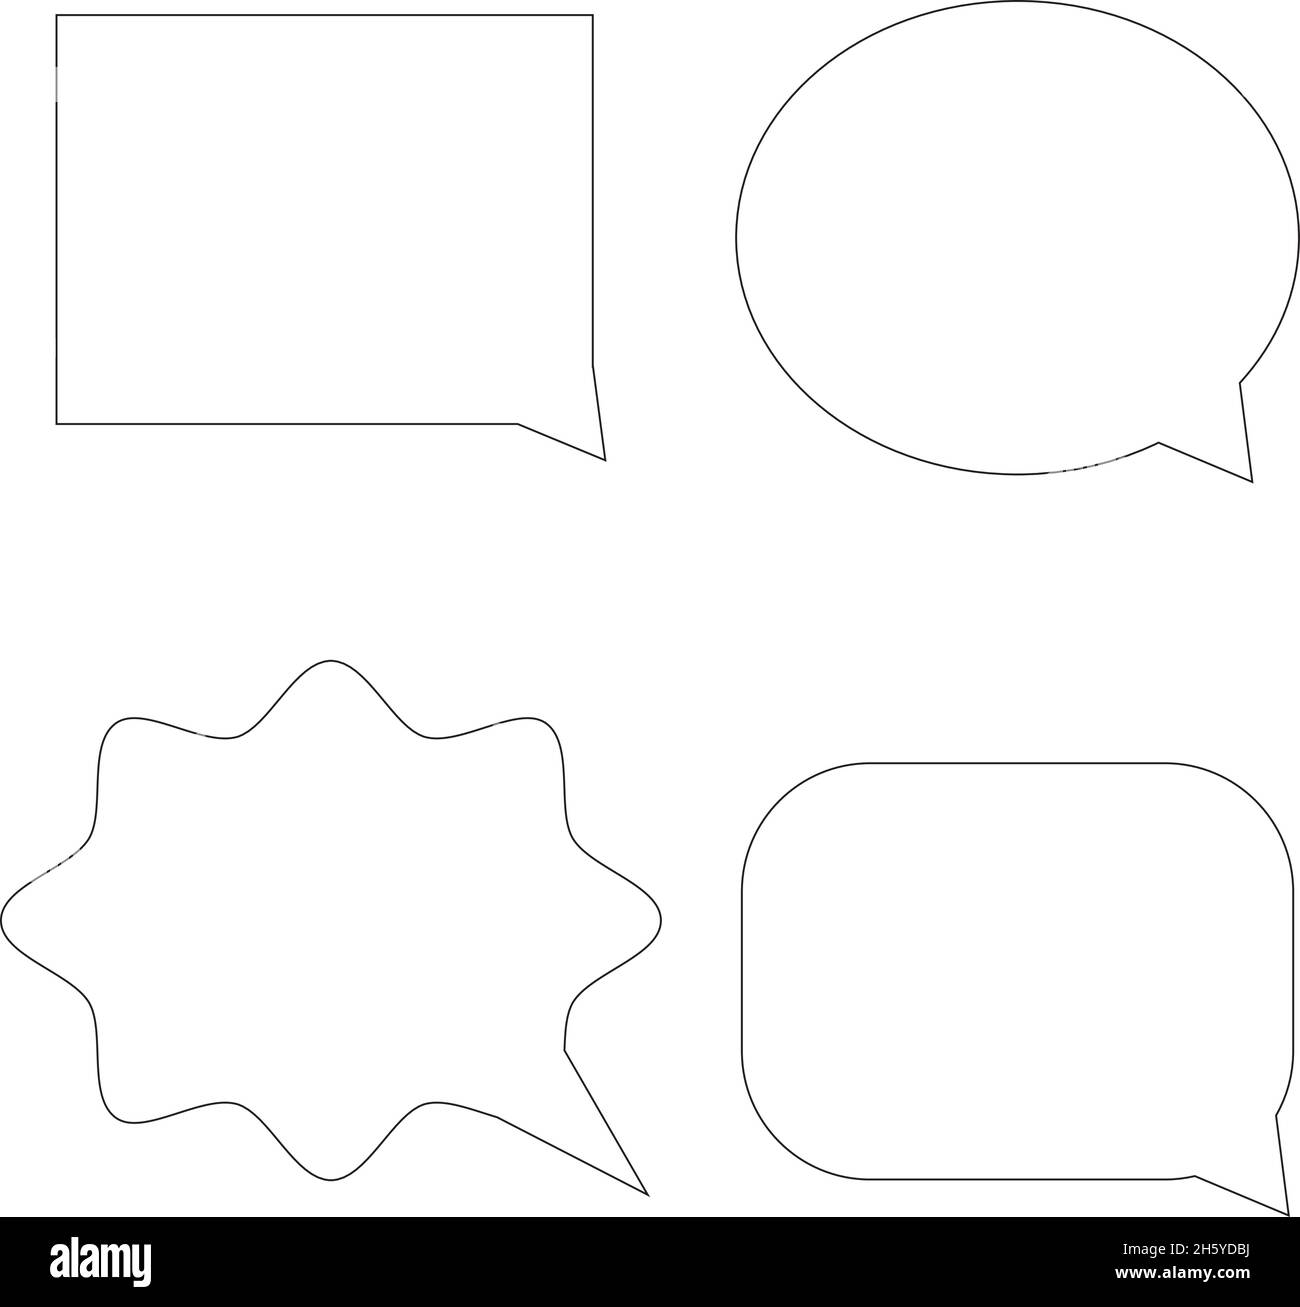 speech balloons of various shapes. It can be used to enter conversations or thoughts. Stock Vector